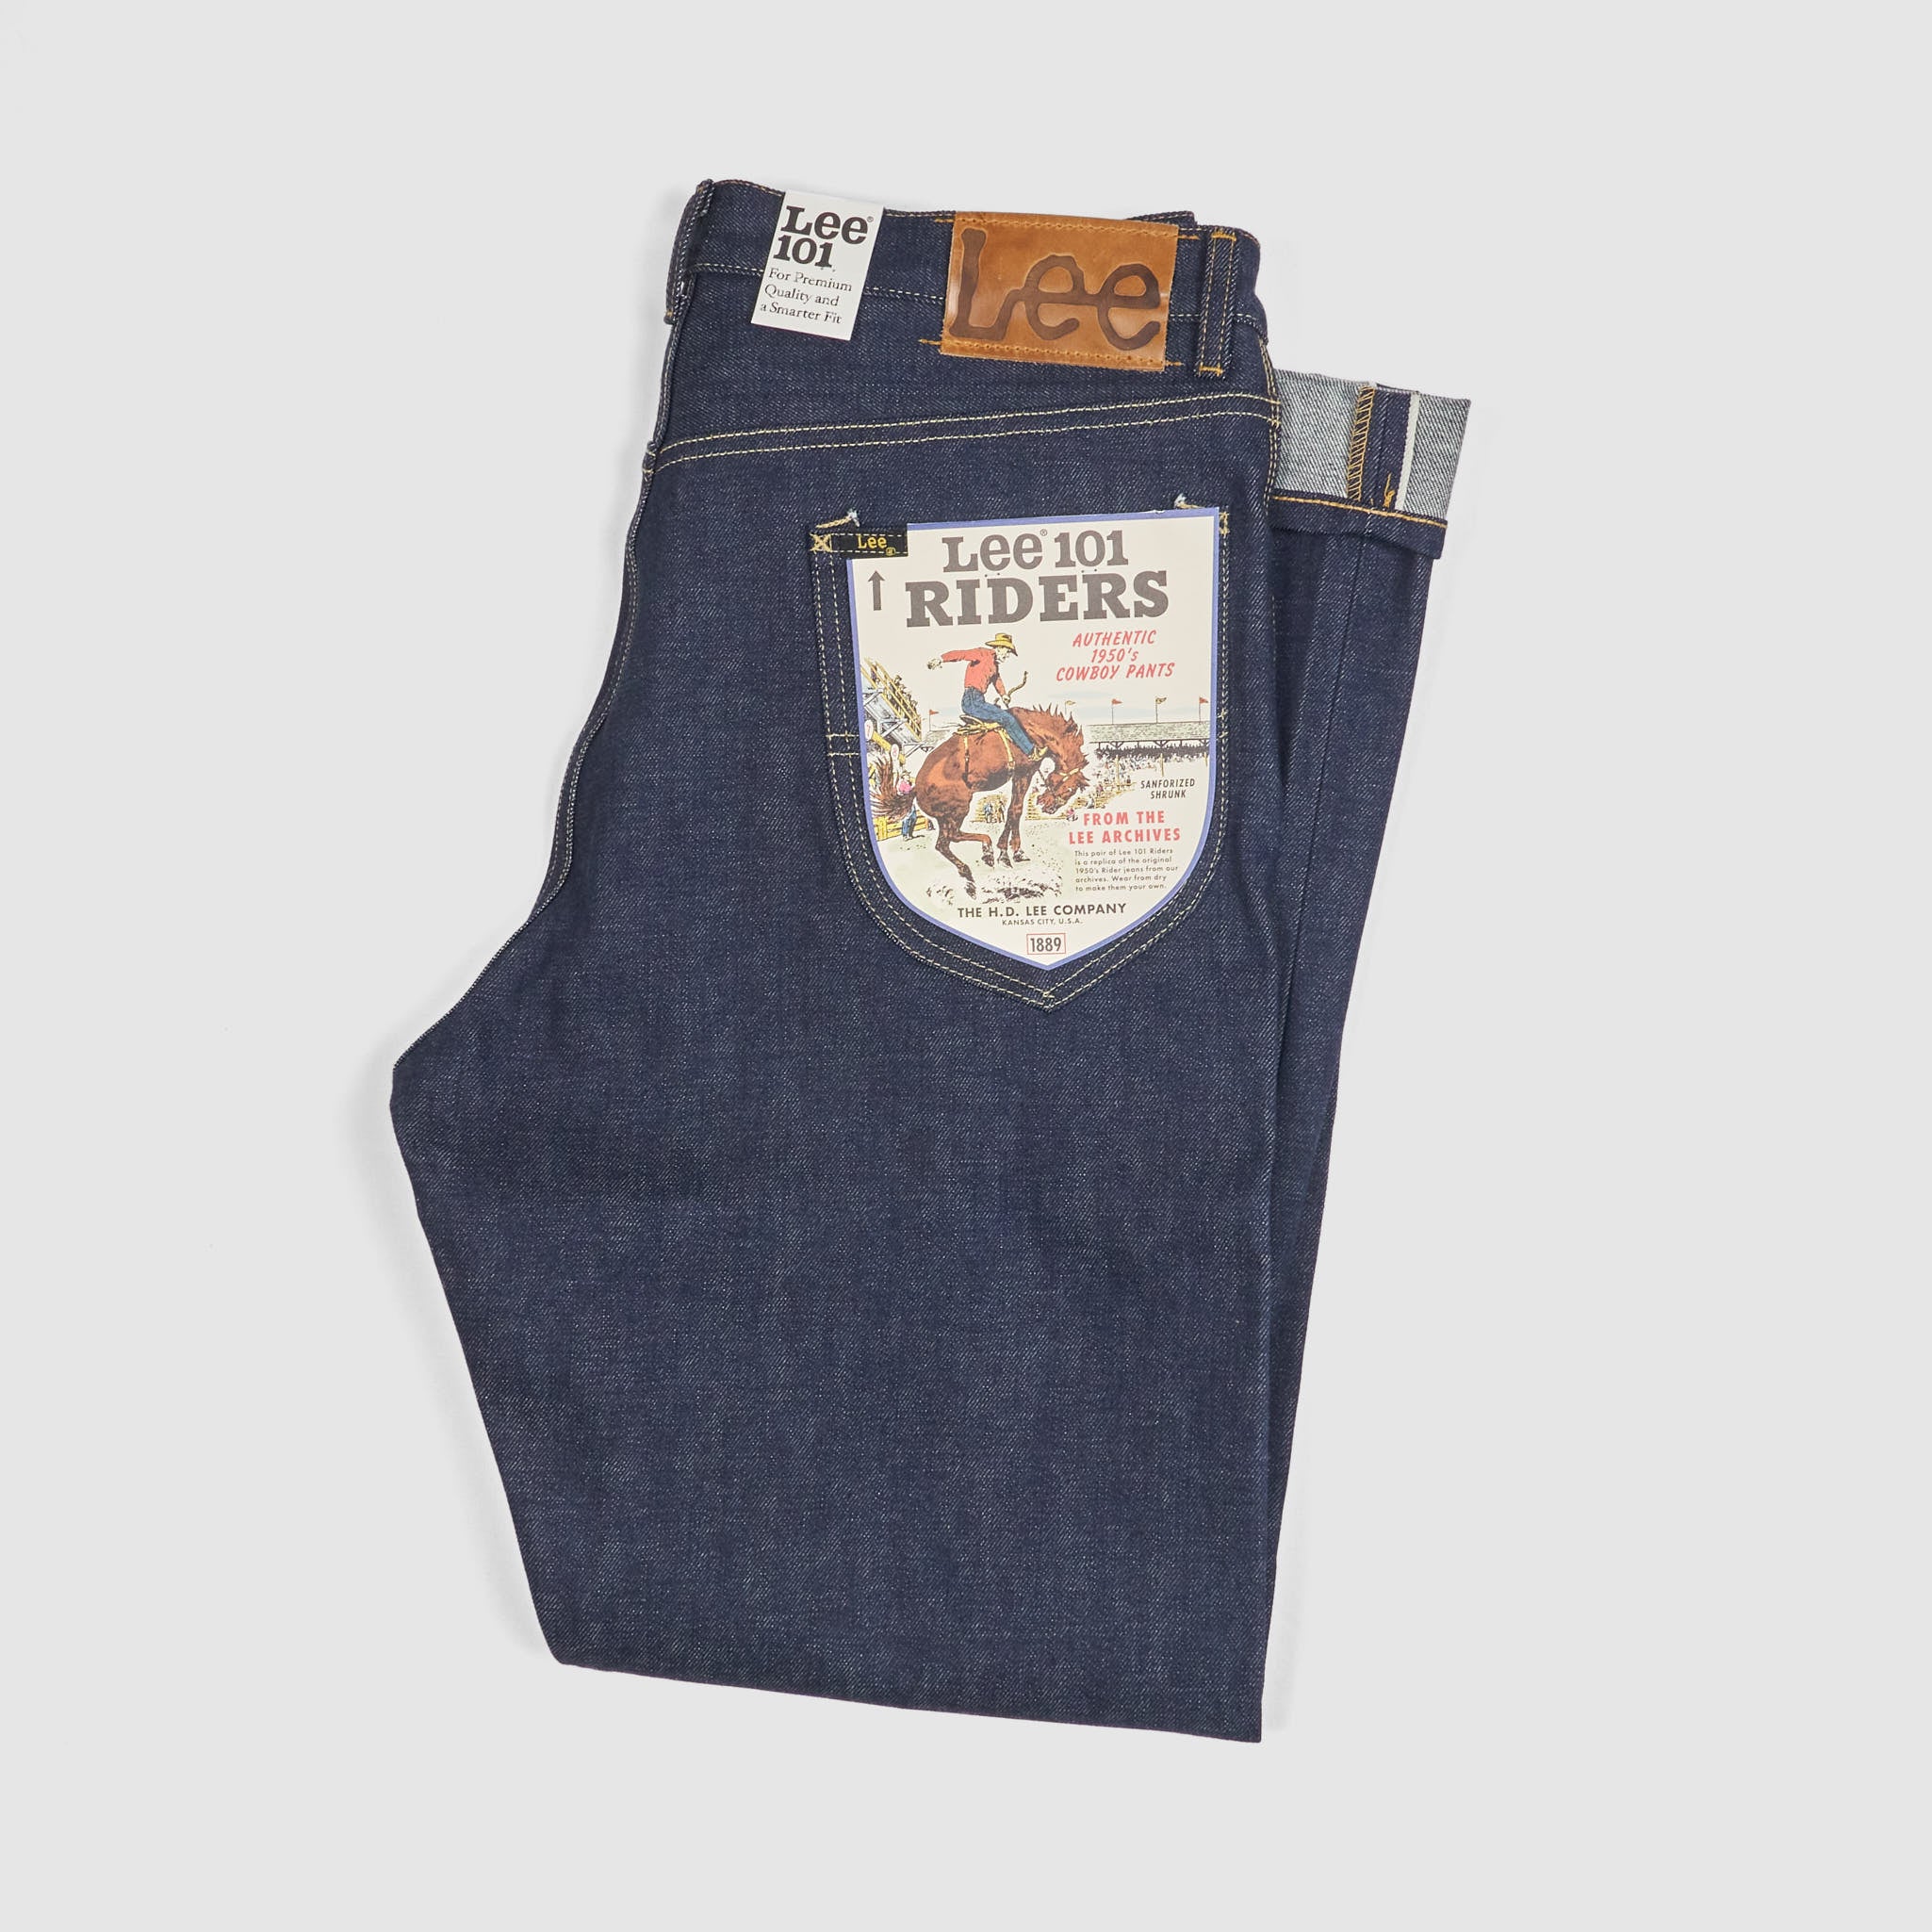 Lee 101 50s Rider Jeans - DeeCee style